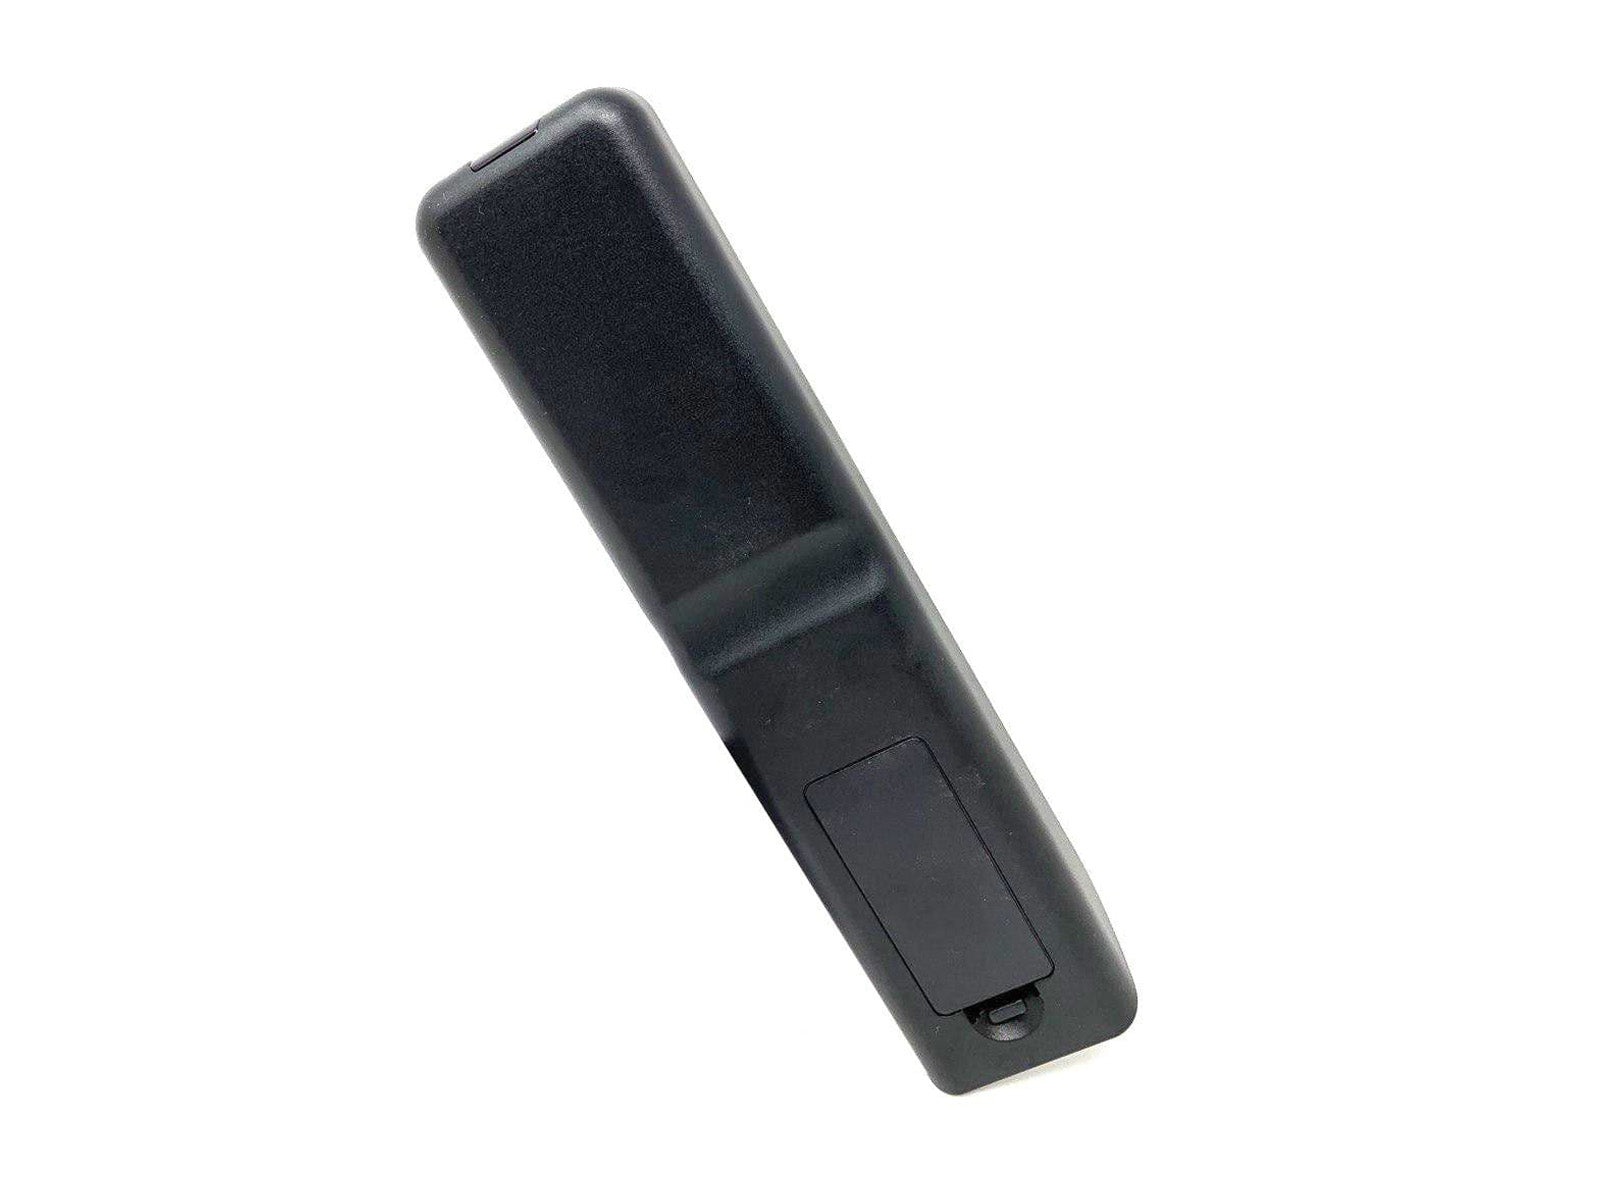  Replacement Remote Control Compatible with PROCASTER Universal TV's Back View